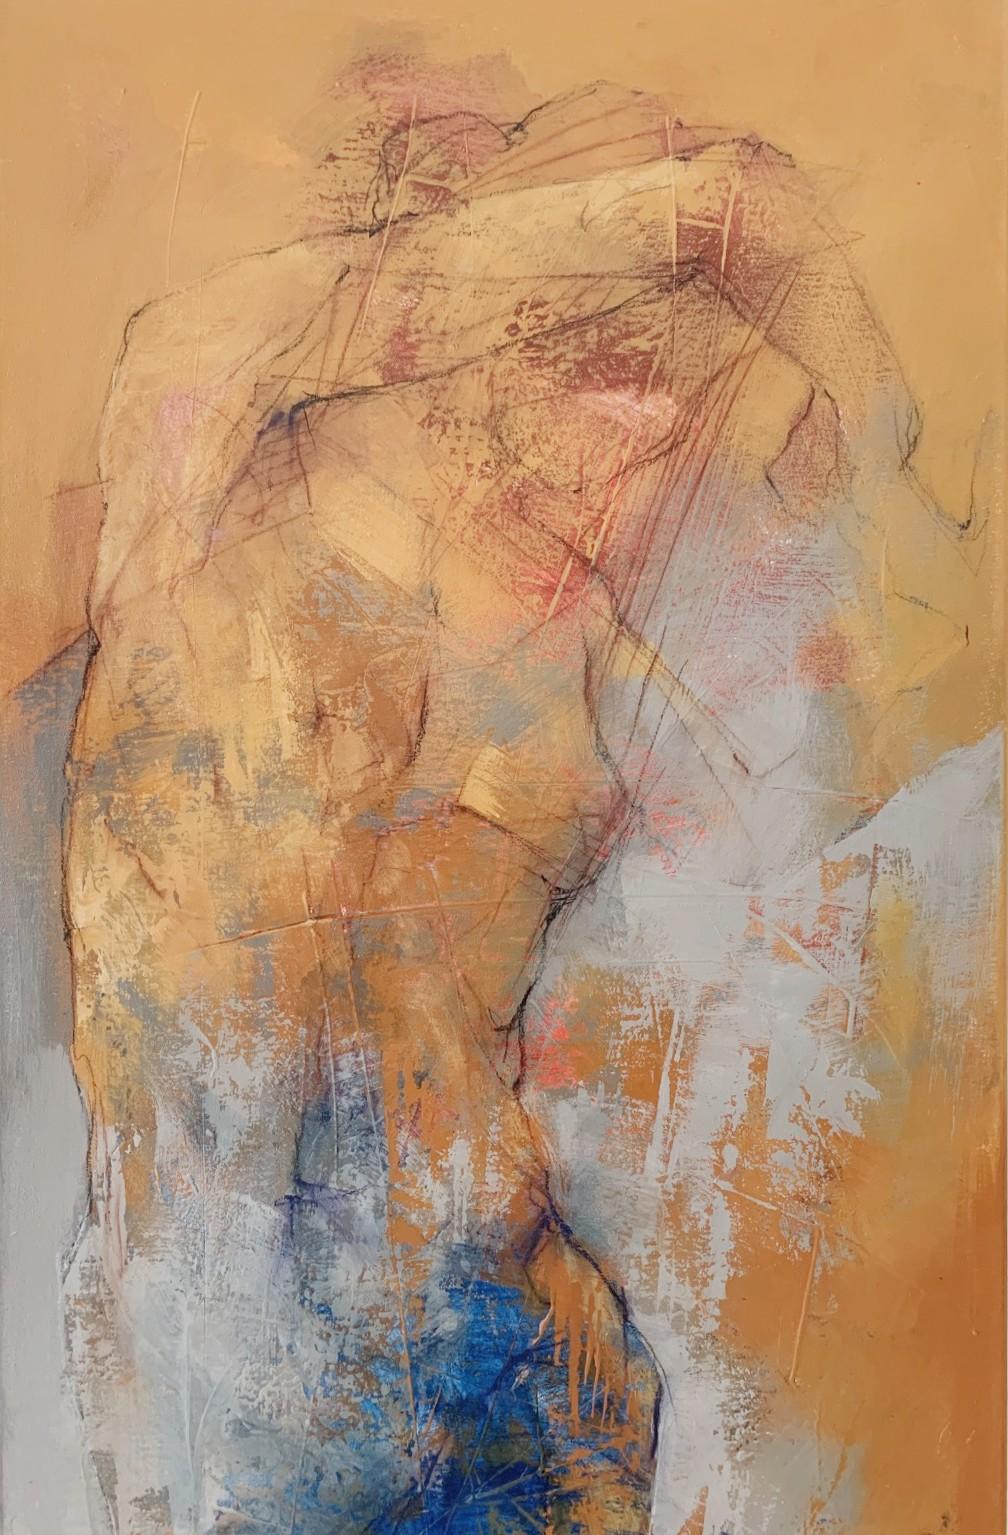 Nude - 21st Century, Contemporary Figurative Oil Painting, Abstraction  - Brown Figurative Painting by Michał Bajsarowicz